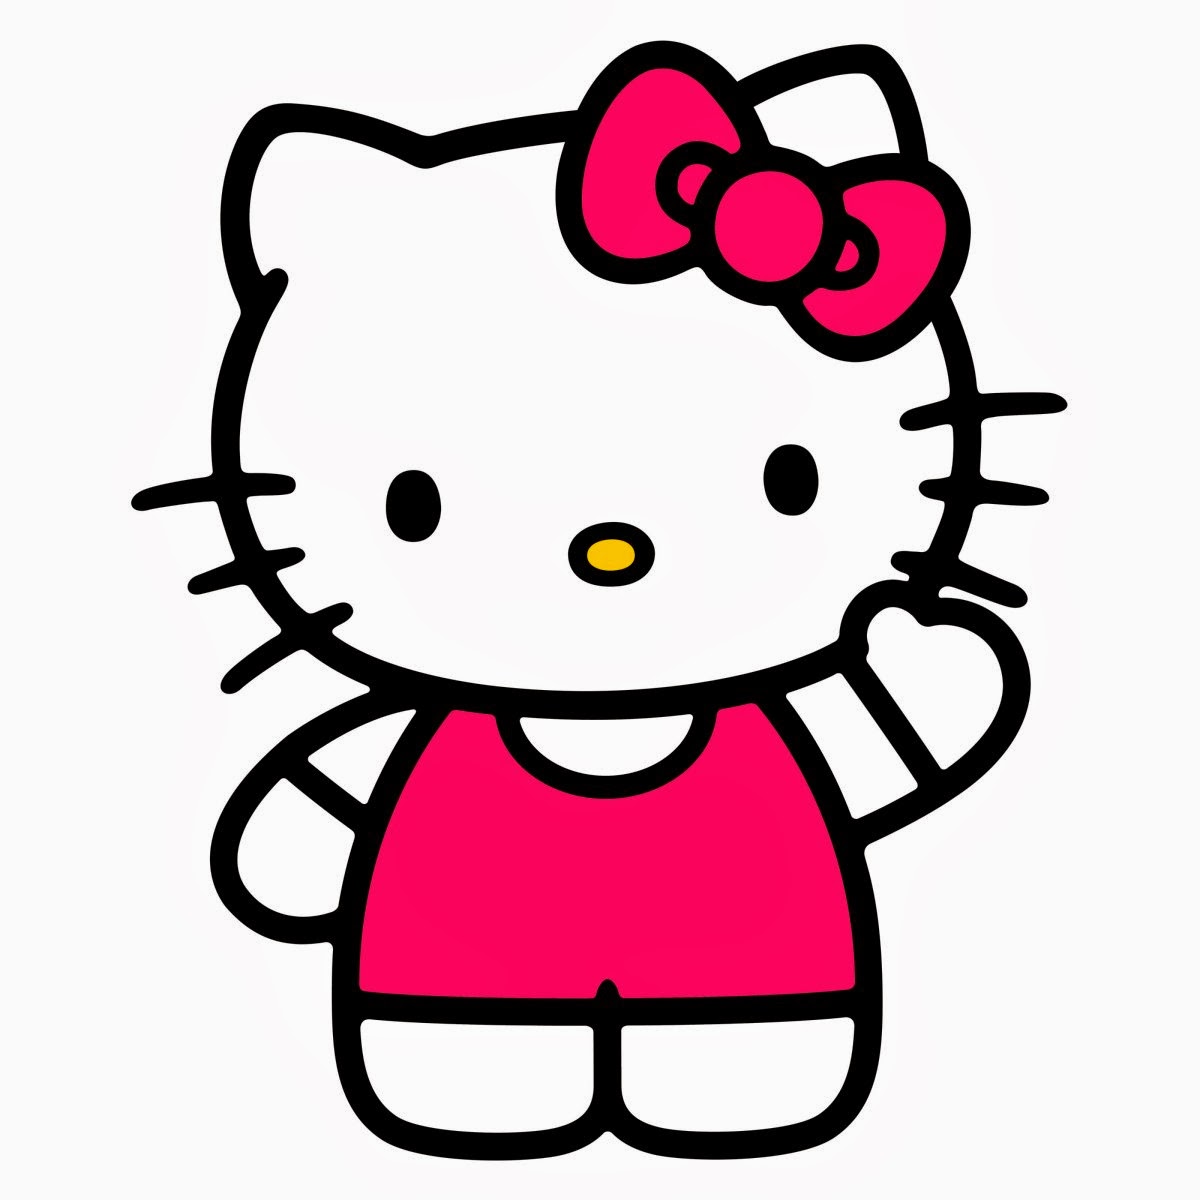 ImagesList.com: Hello Kitty Images, part 2